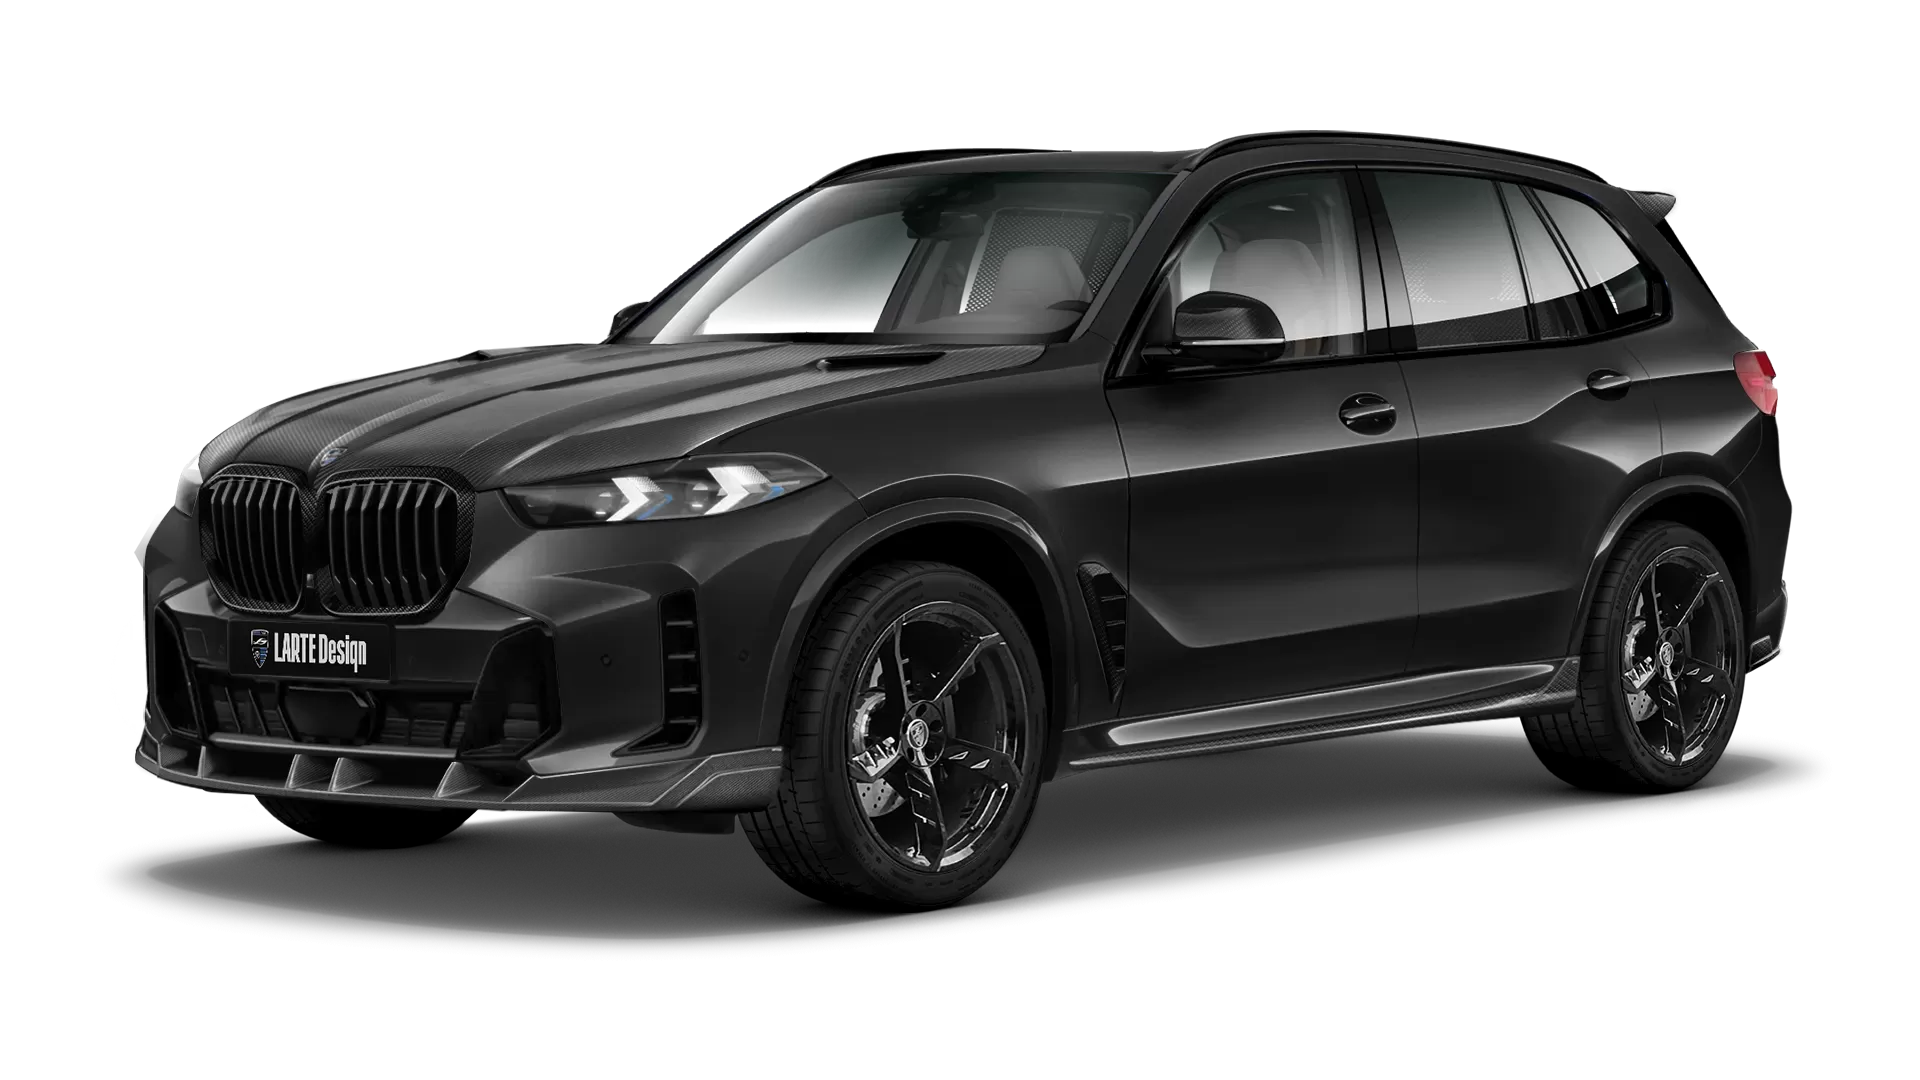 BMW X5 G05 LCI Facelift with carbon body kit: front view shown in Sapphire Black